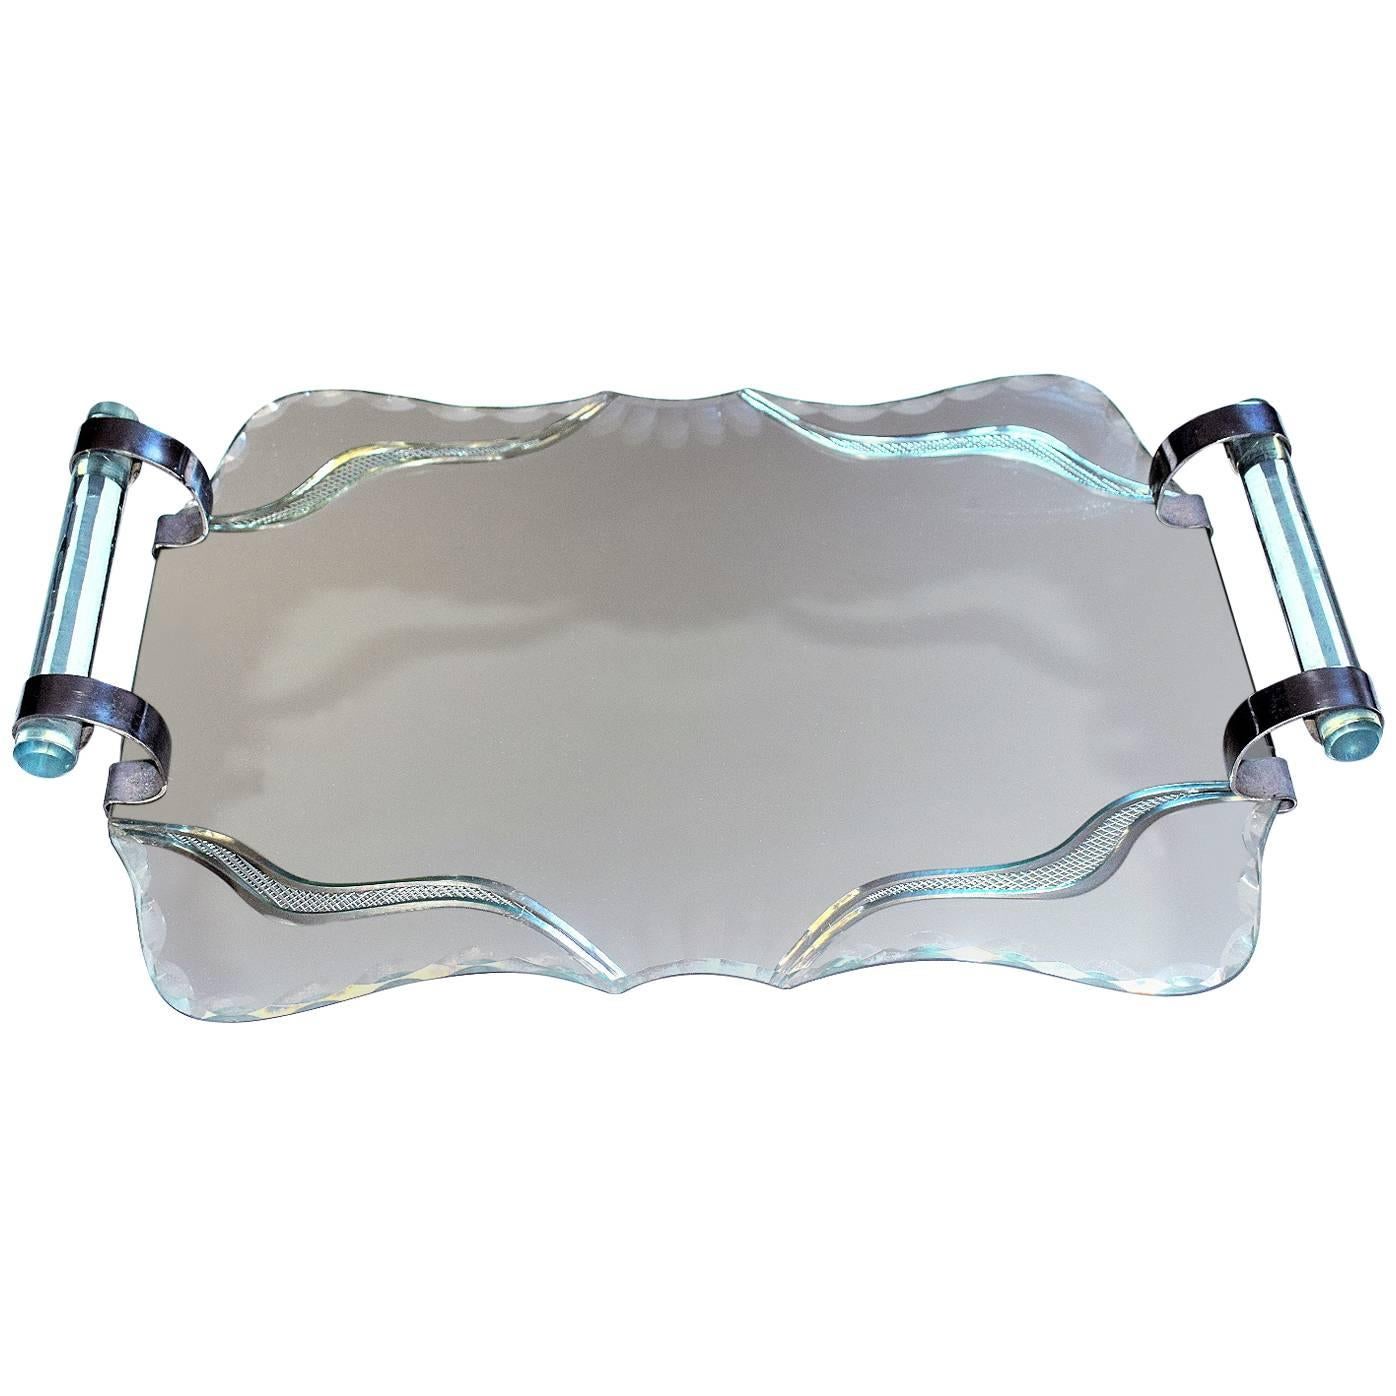 Art Deco, 1930s French Mirror and Chrome Drinks Tray